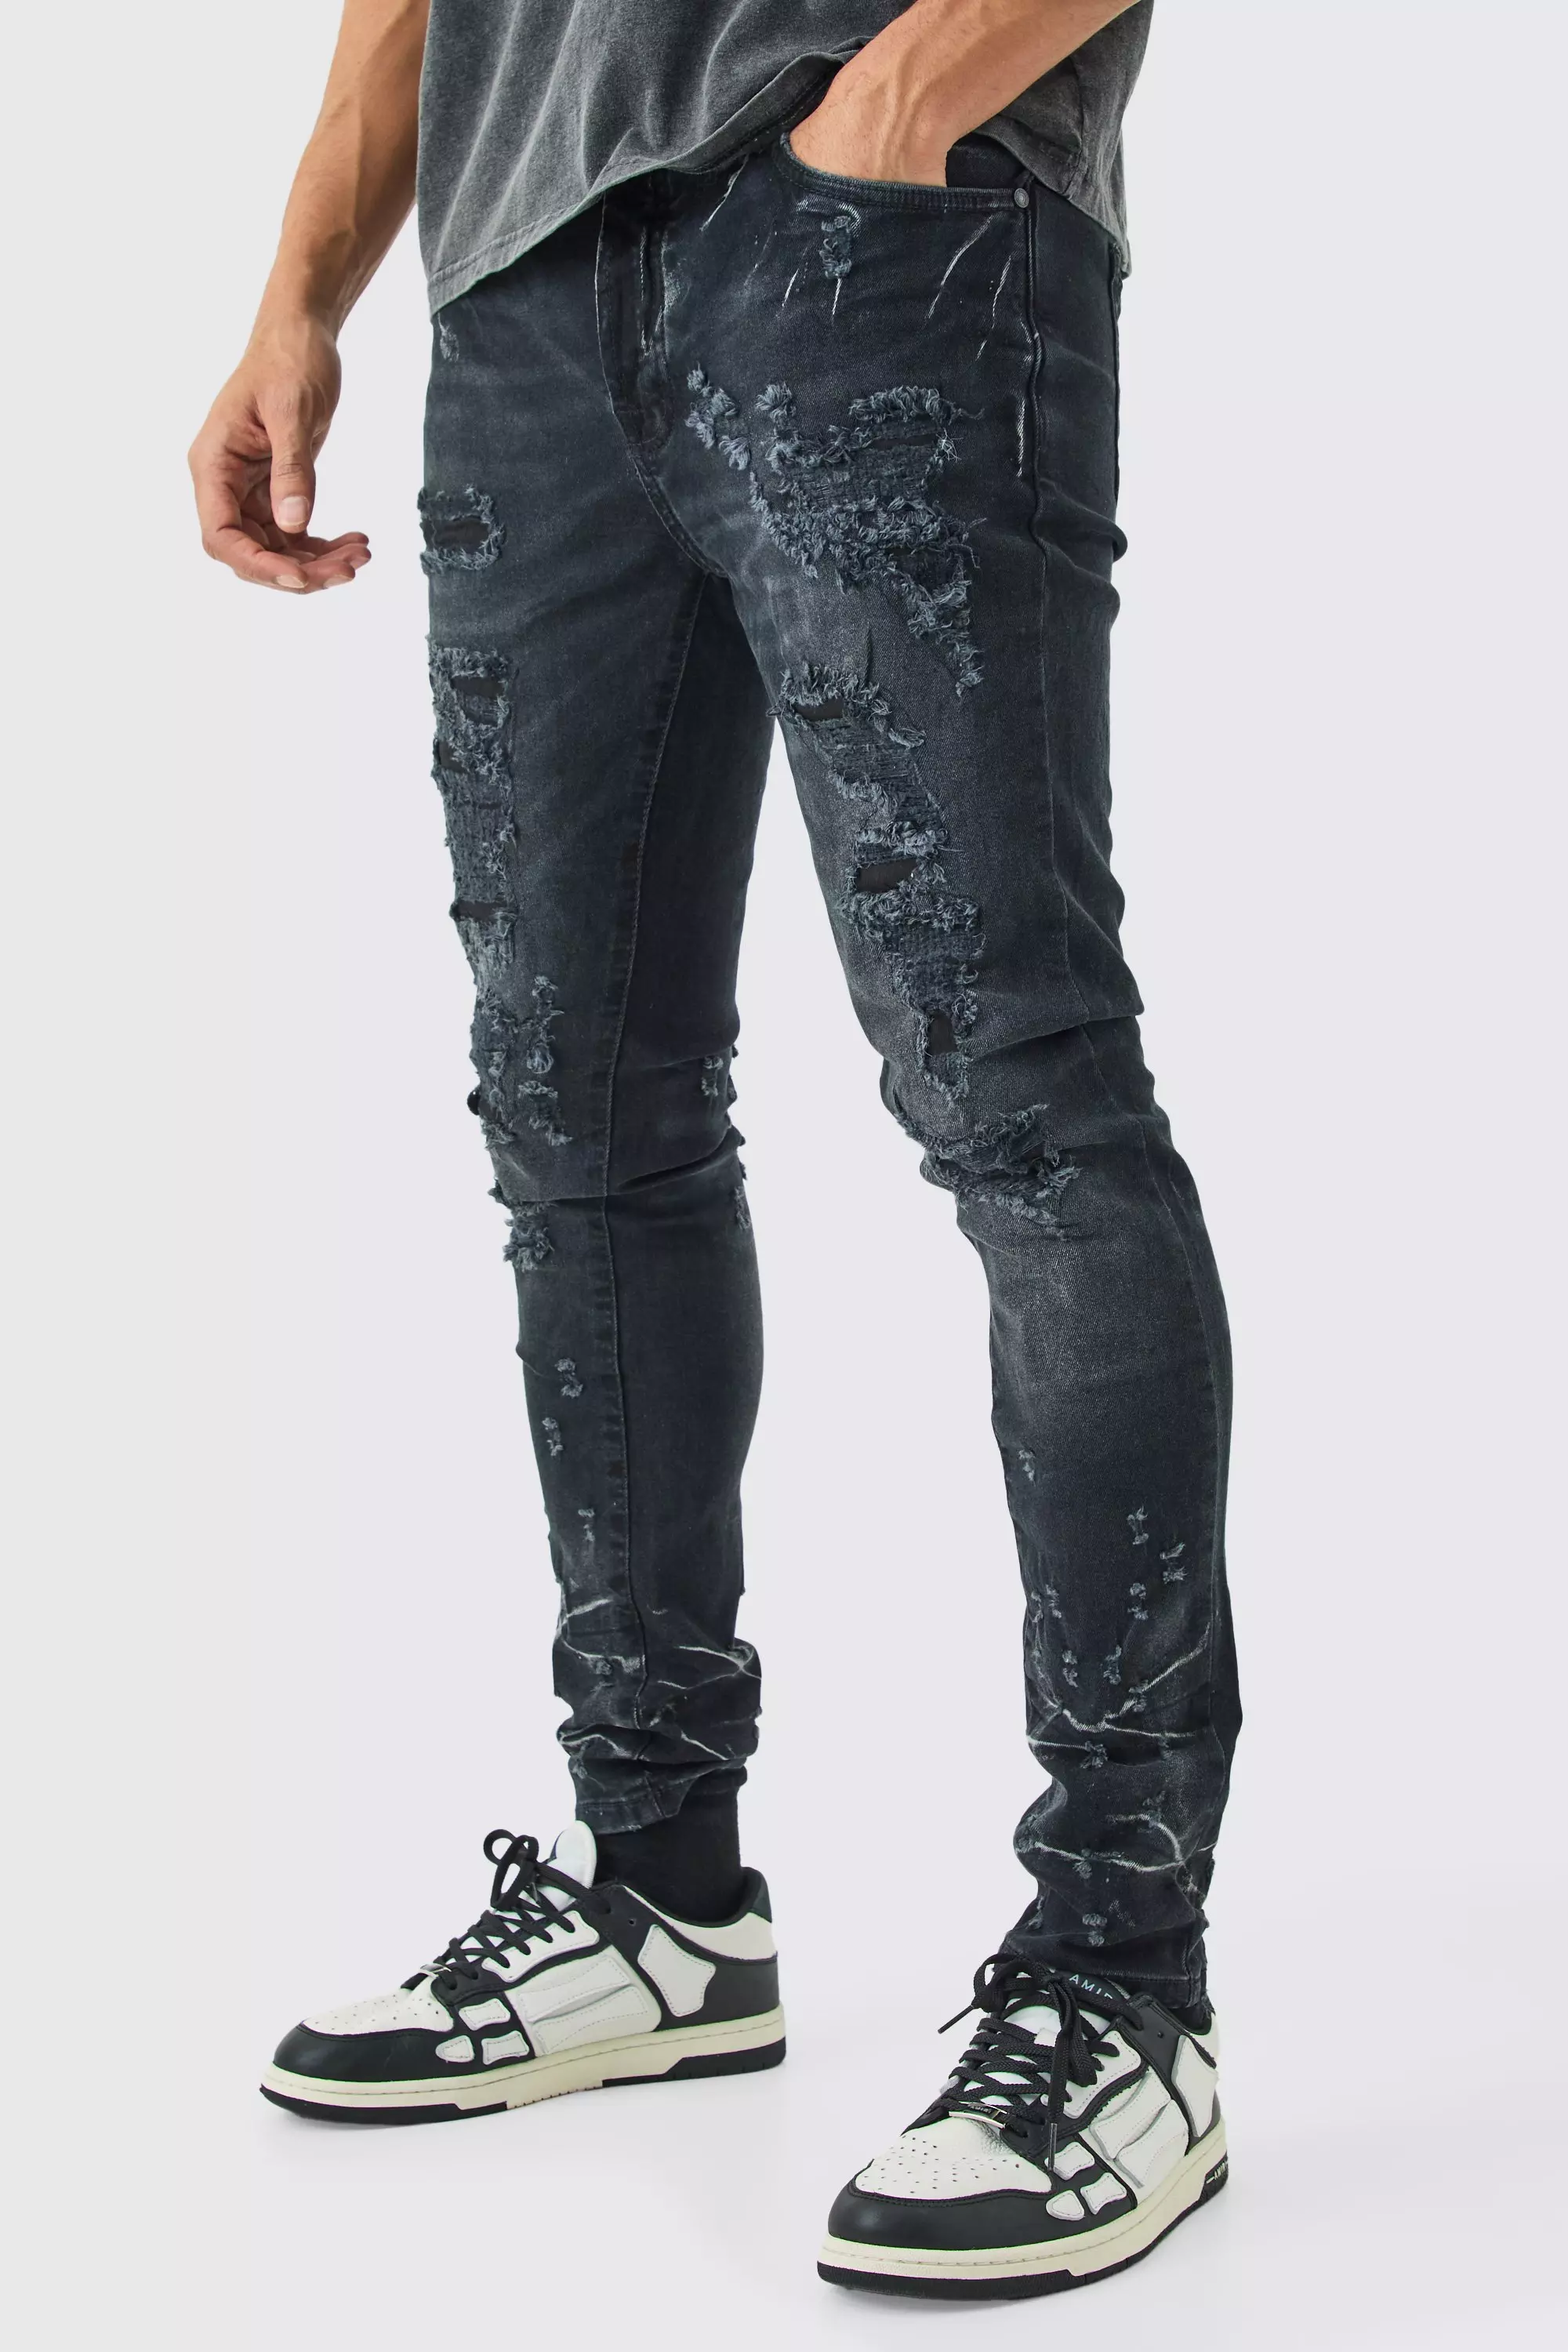 Plain Casual Wear Men Black Ripped Jeans at Rs 1090/piece in New